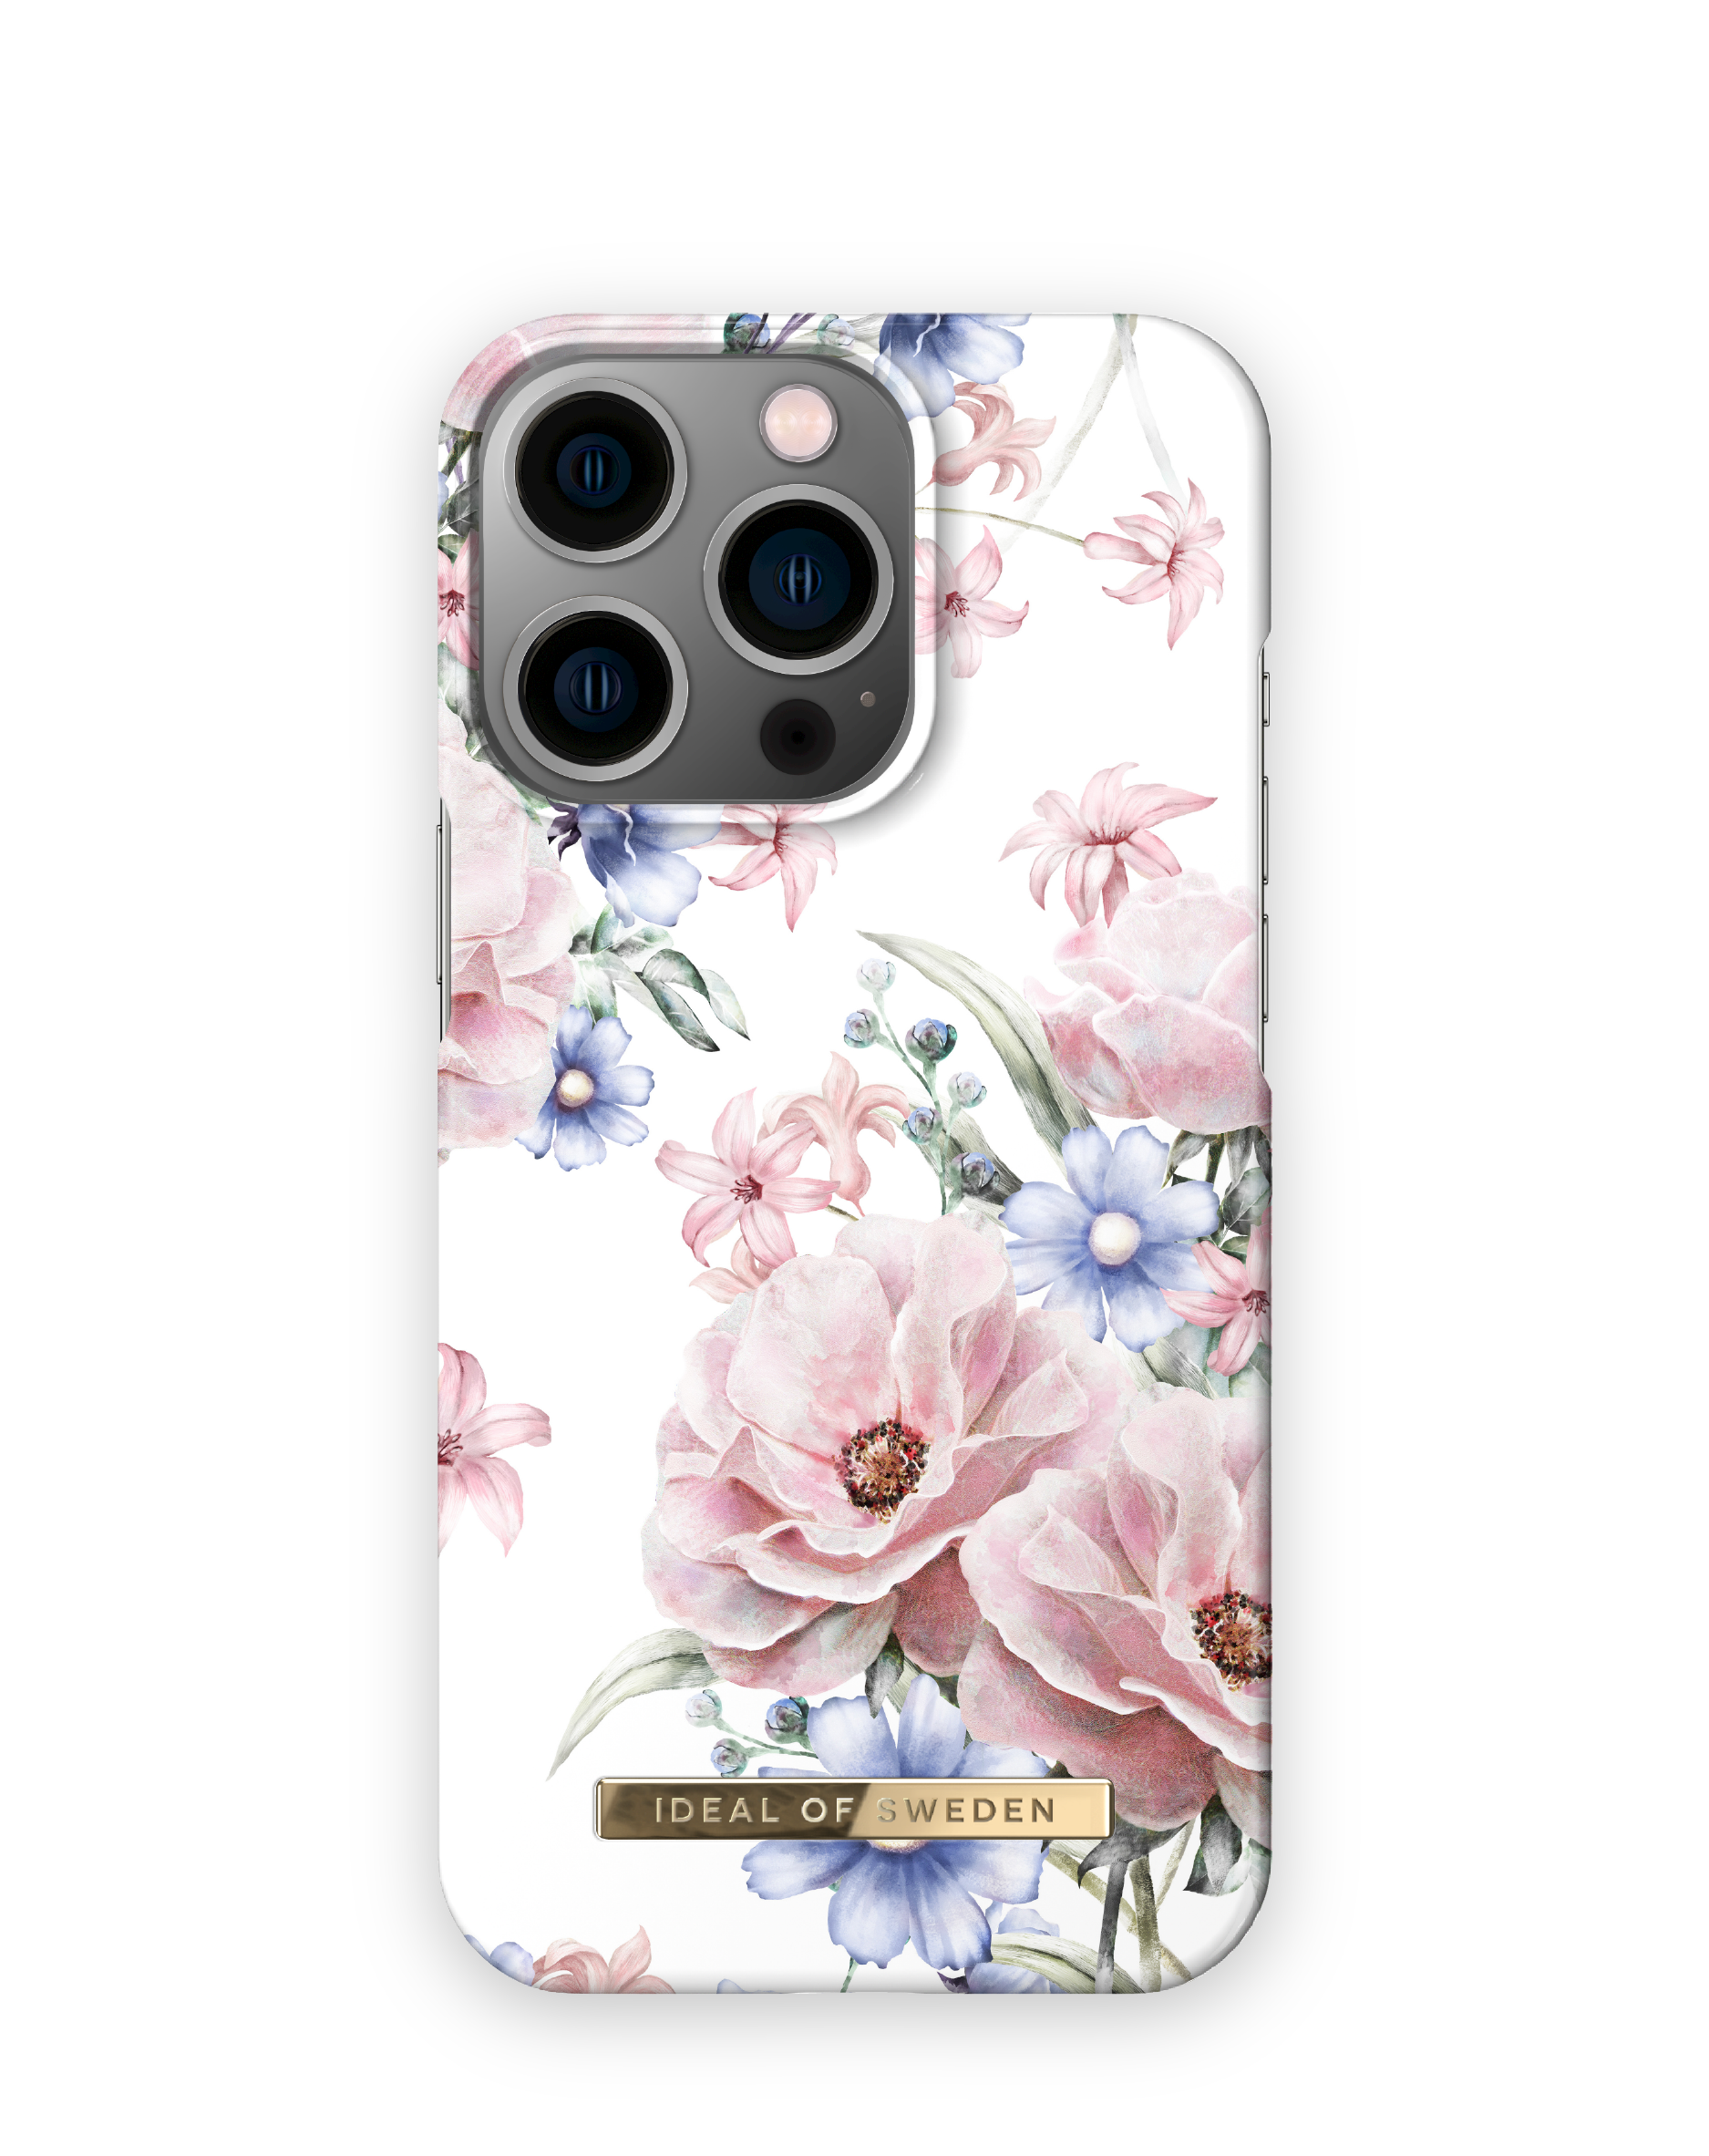 SWEDEN 14 Floral Apple, Pro, iPhone OF IDEAL Romance IDFCSS17-I2261P-58, Backcover,